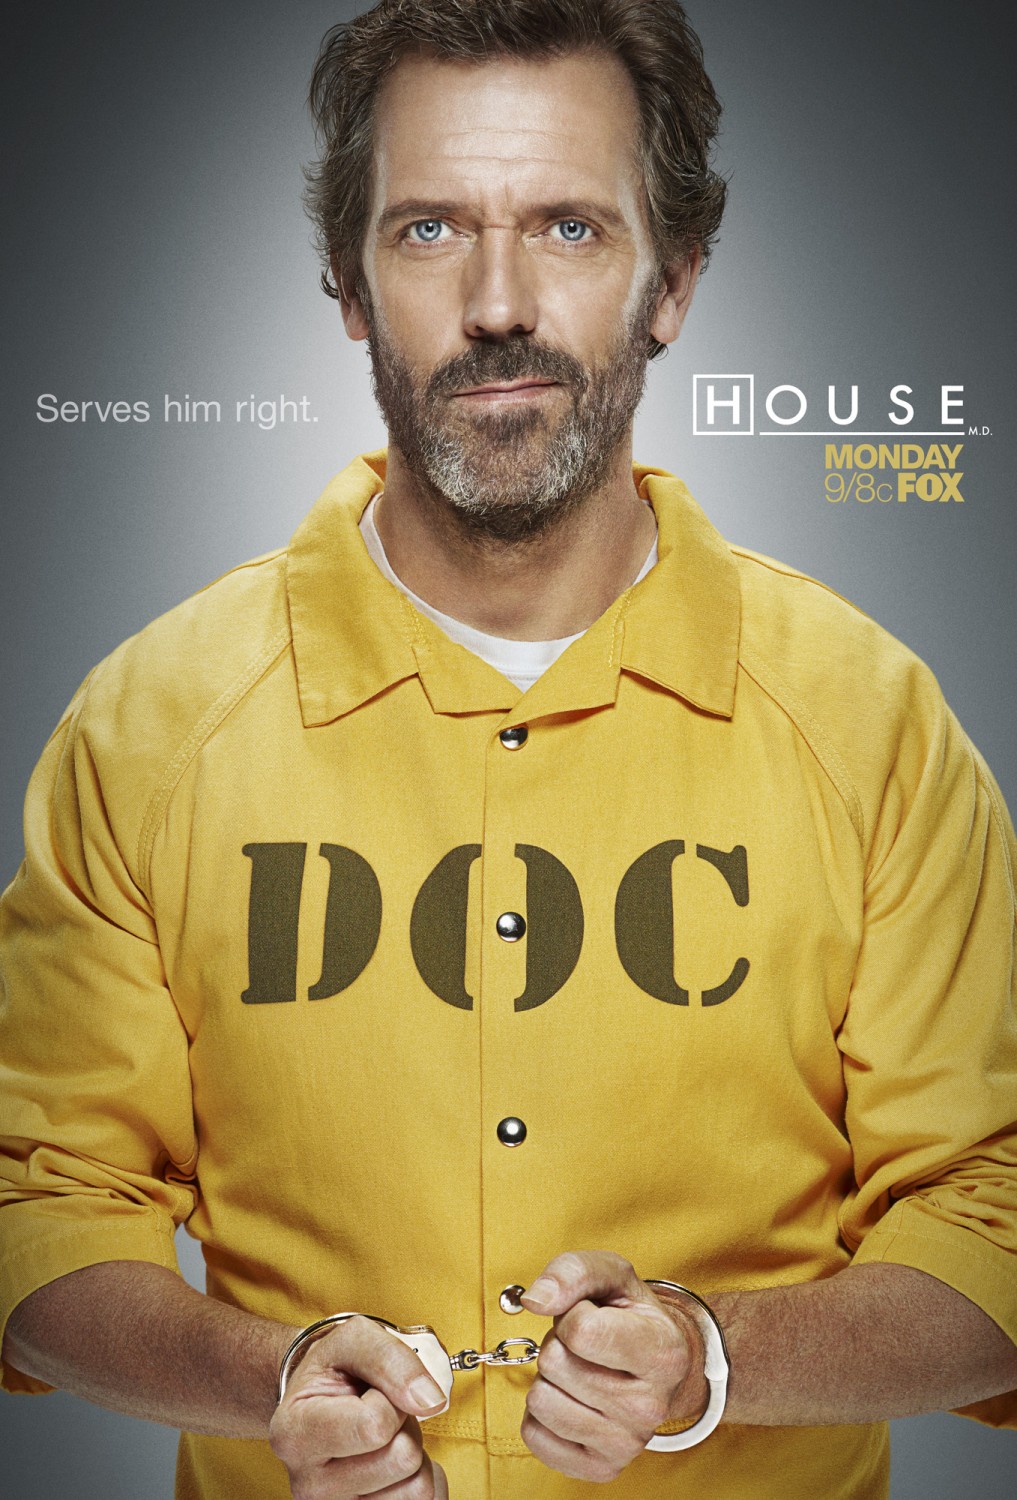 Extra Large TV Poster Image for House, M.D. (#17 of 20)